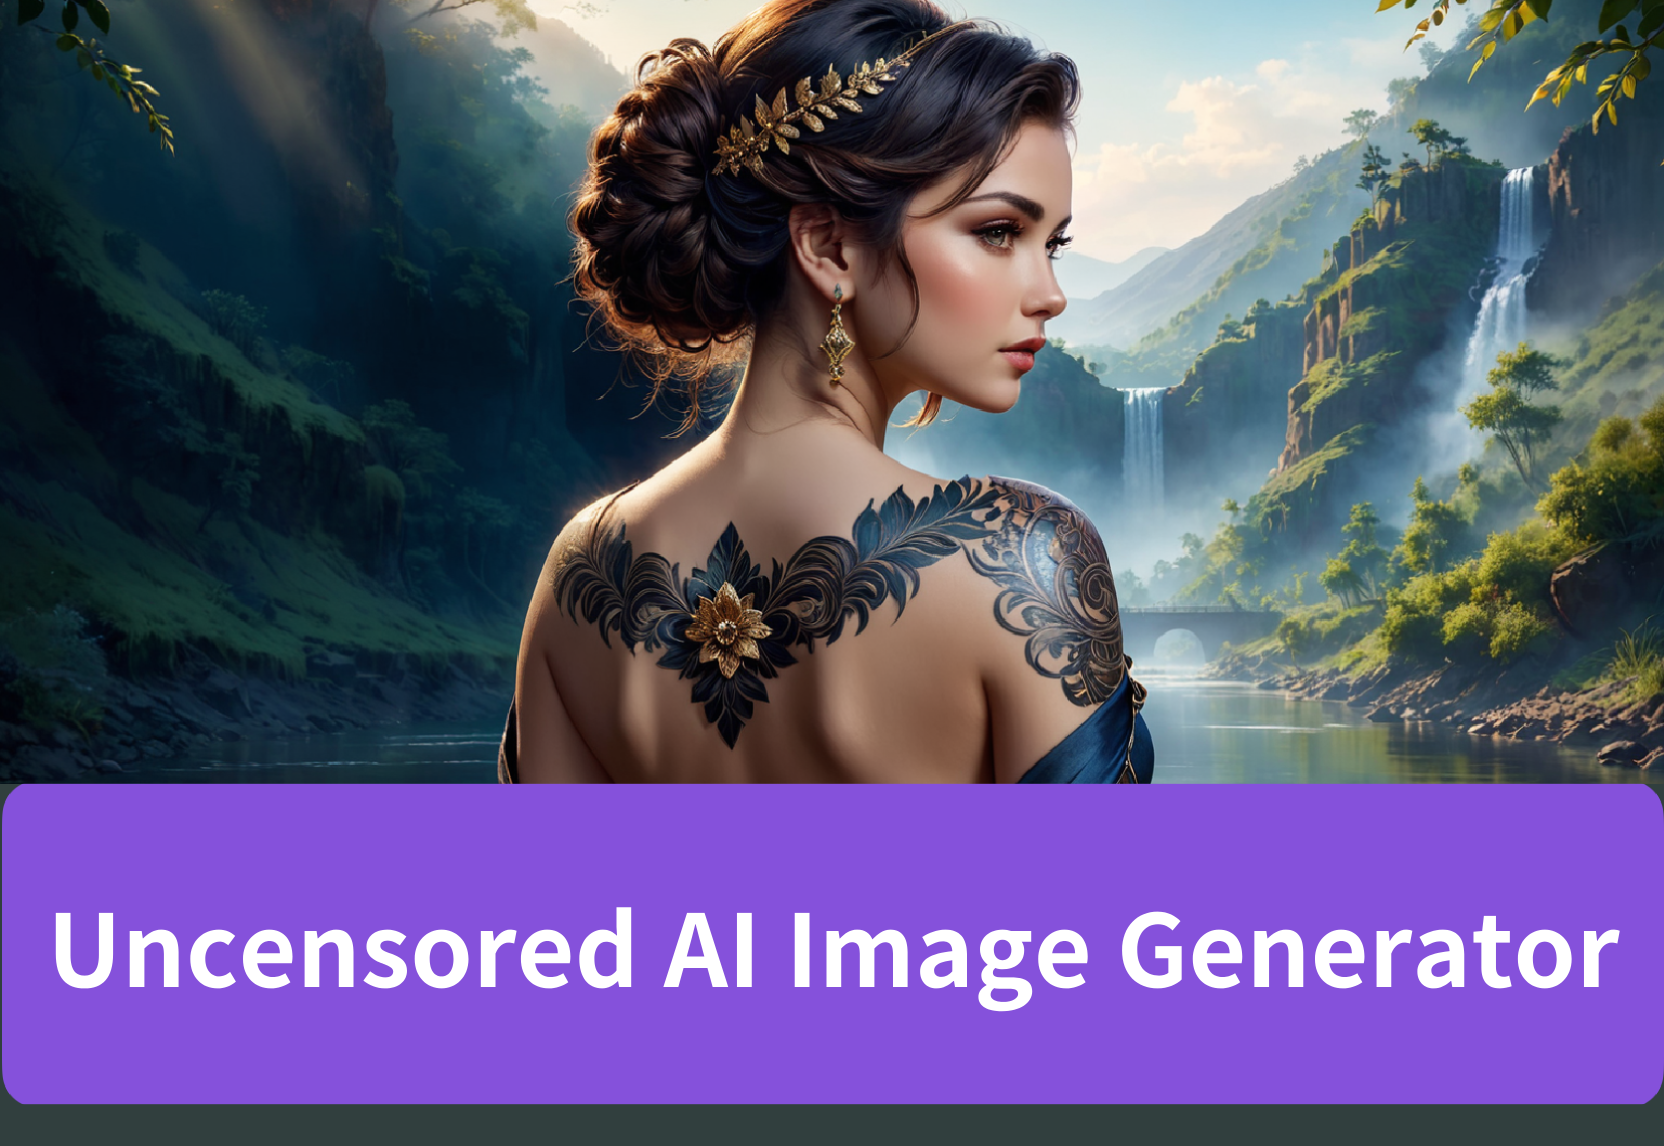 How to Create Uncensored AI Image Generator for NSFW Art？